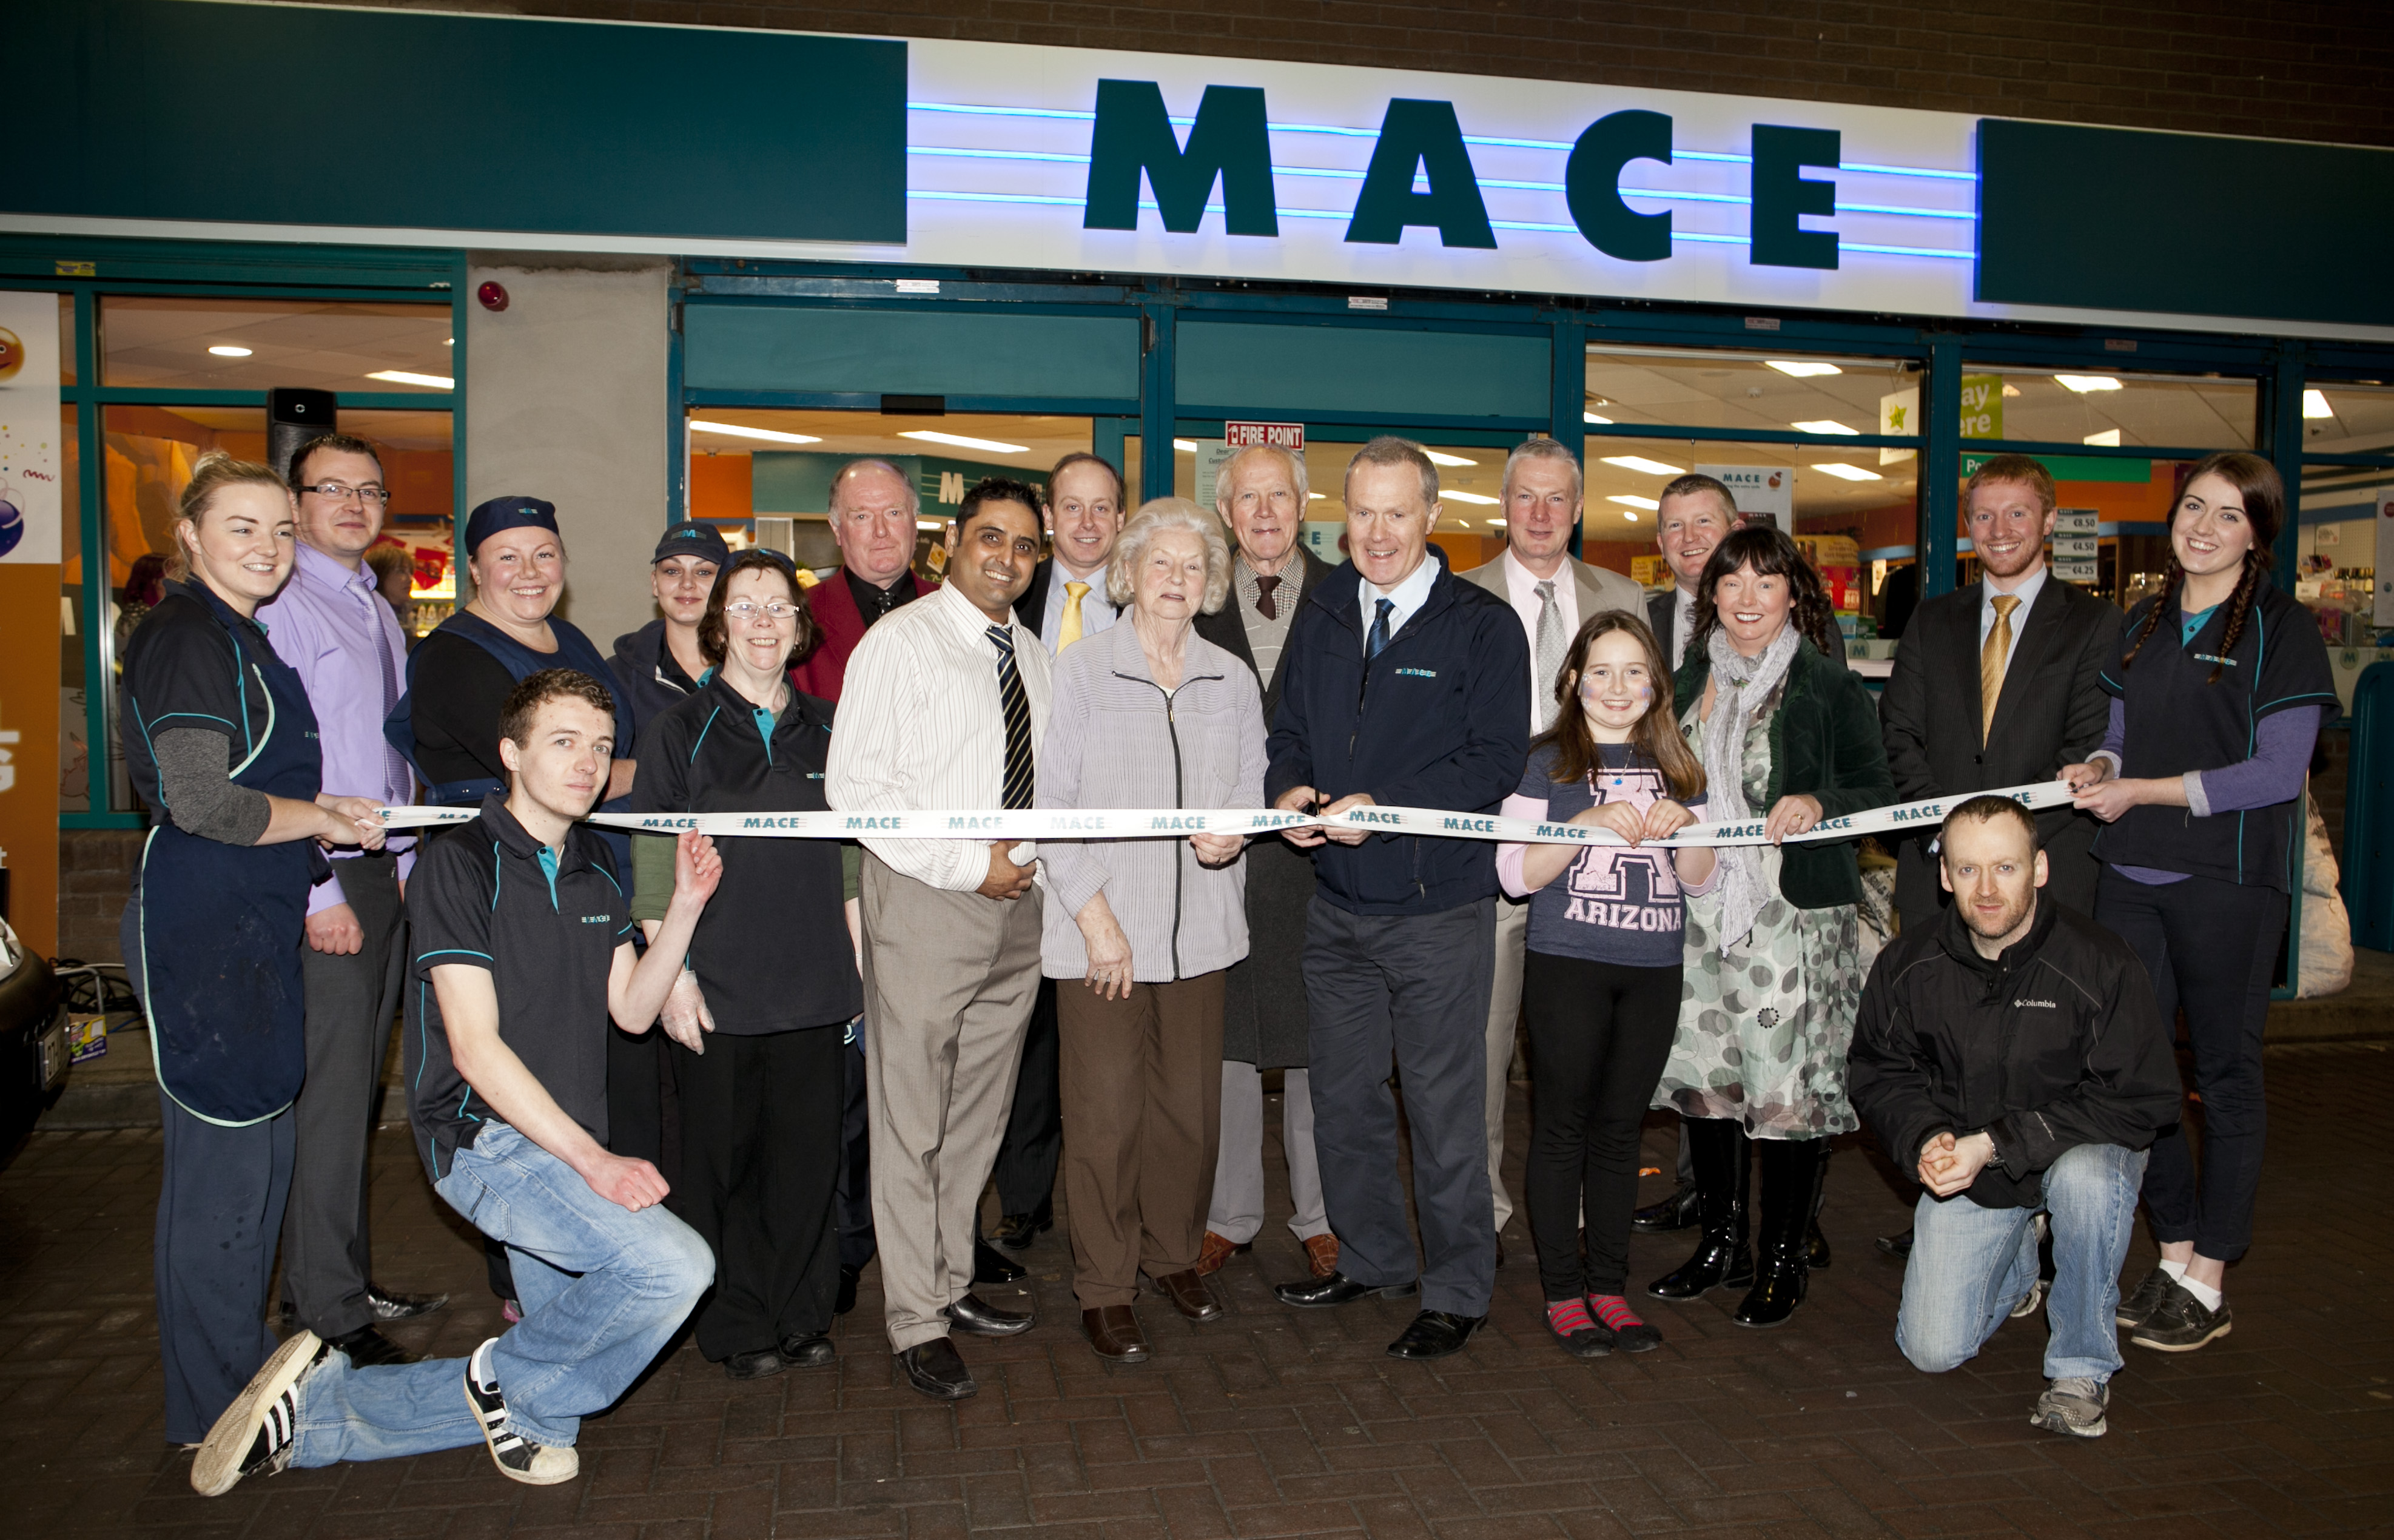 Pat and Áine Flanagan with their team celebrating the most recent revamp on the Dublin Road store in Dundalk